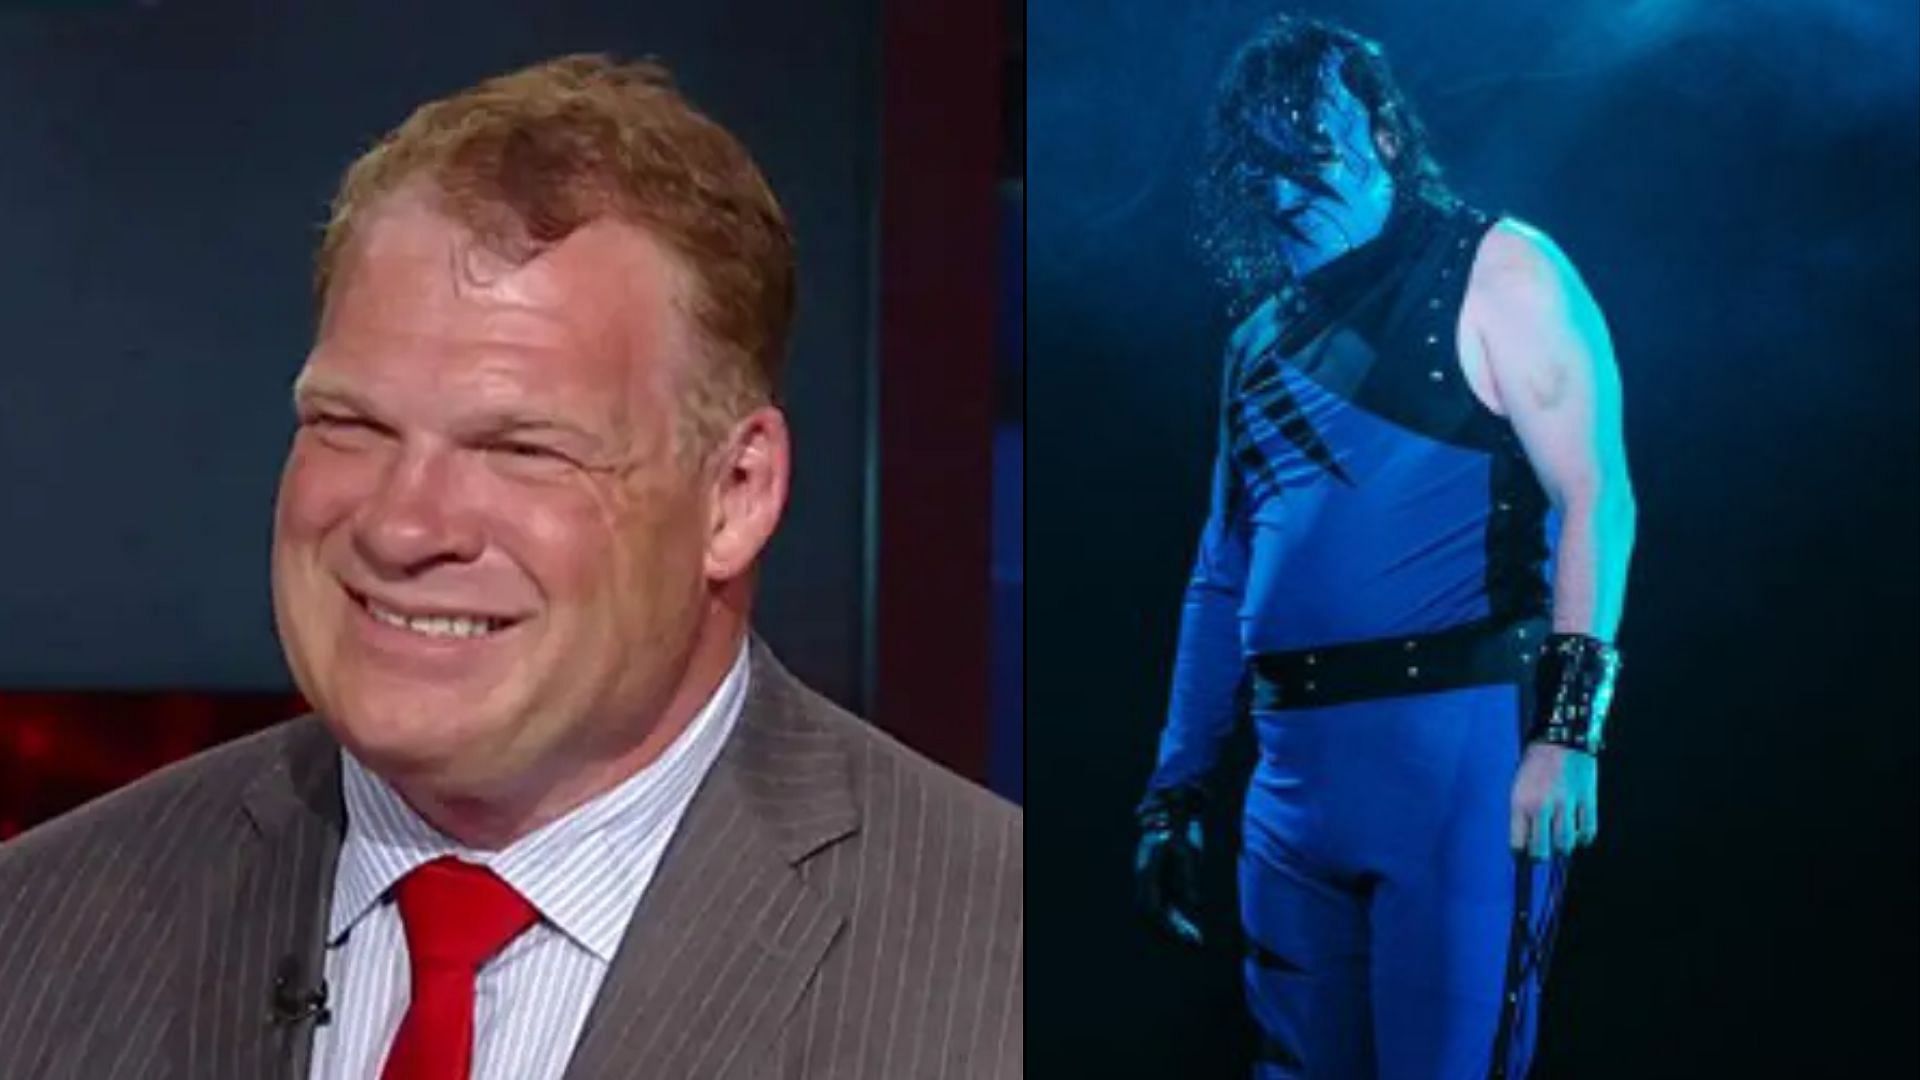 It will be interesting to see if Glenn Jacobs comments on the new Kane